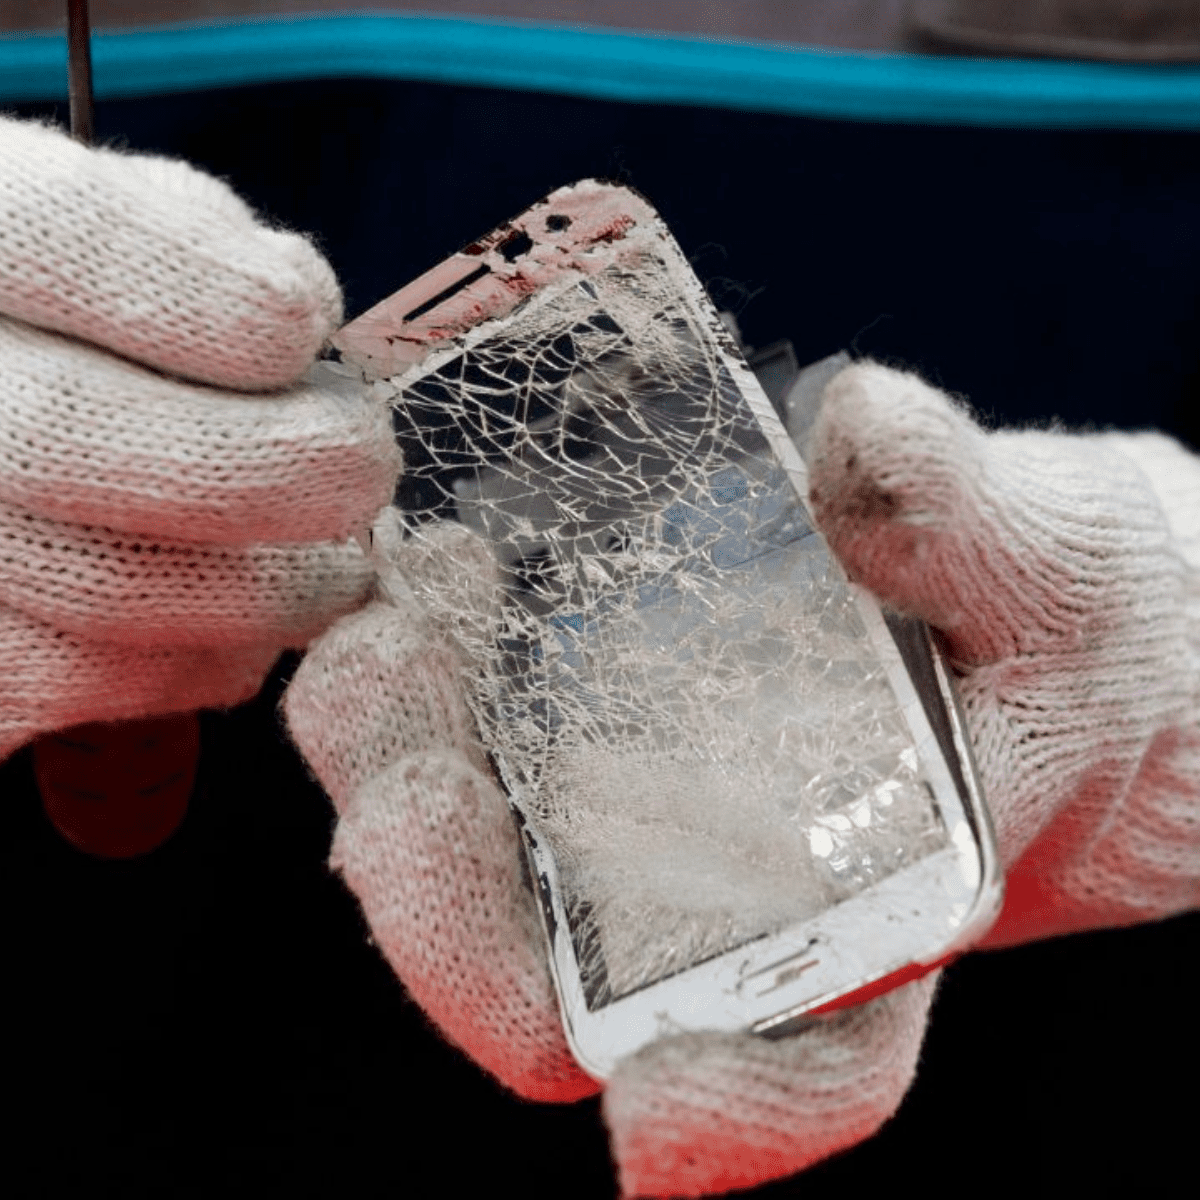 Gloved hands holding a shattered iphone